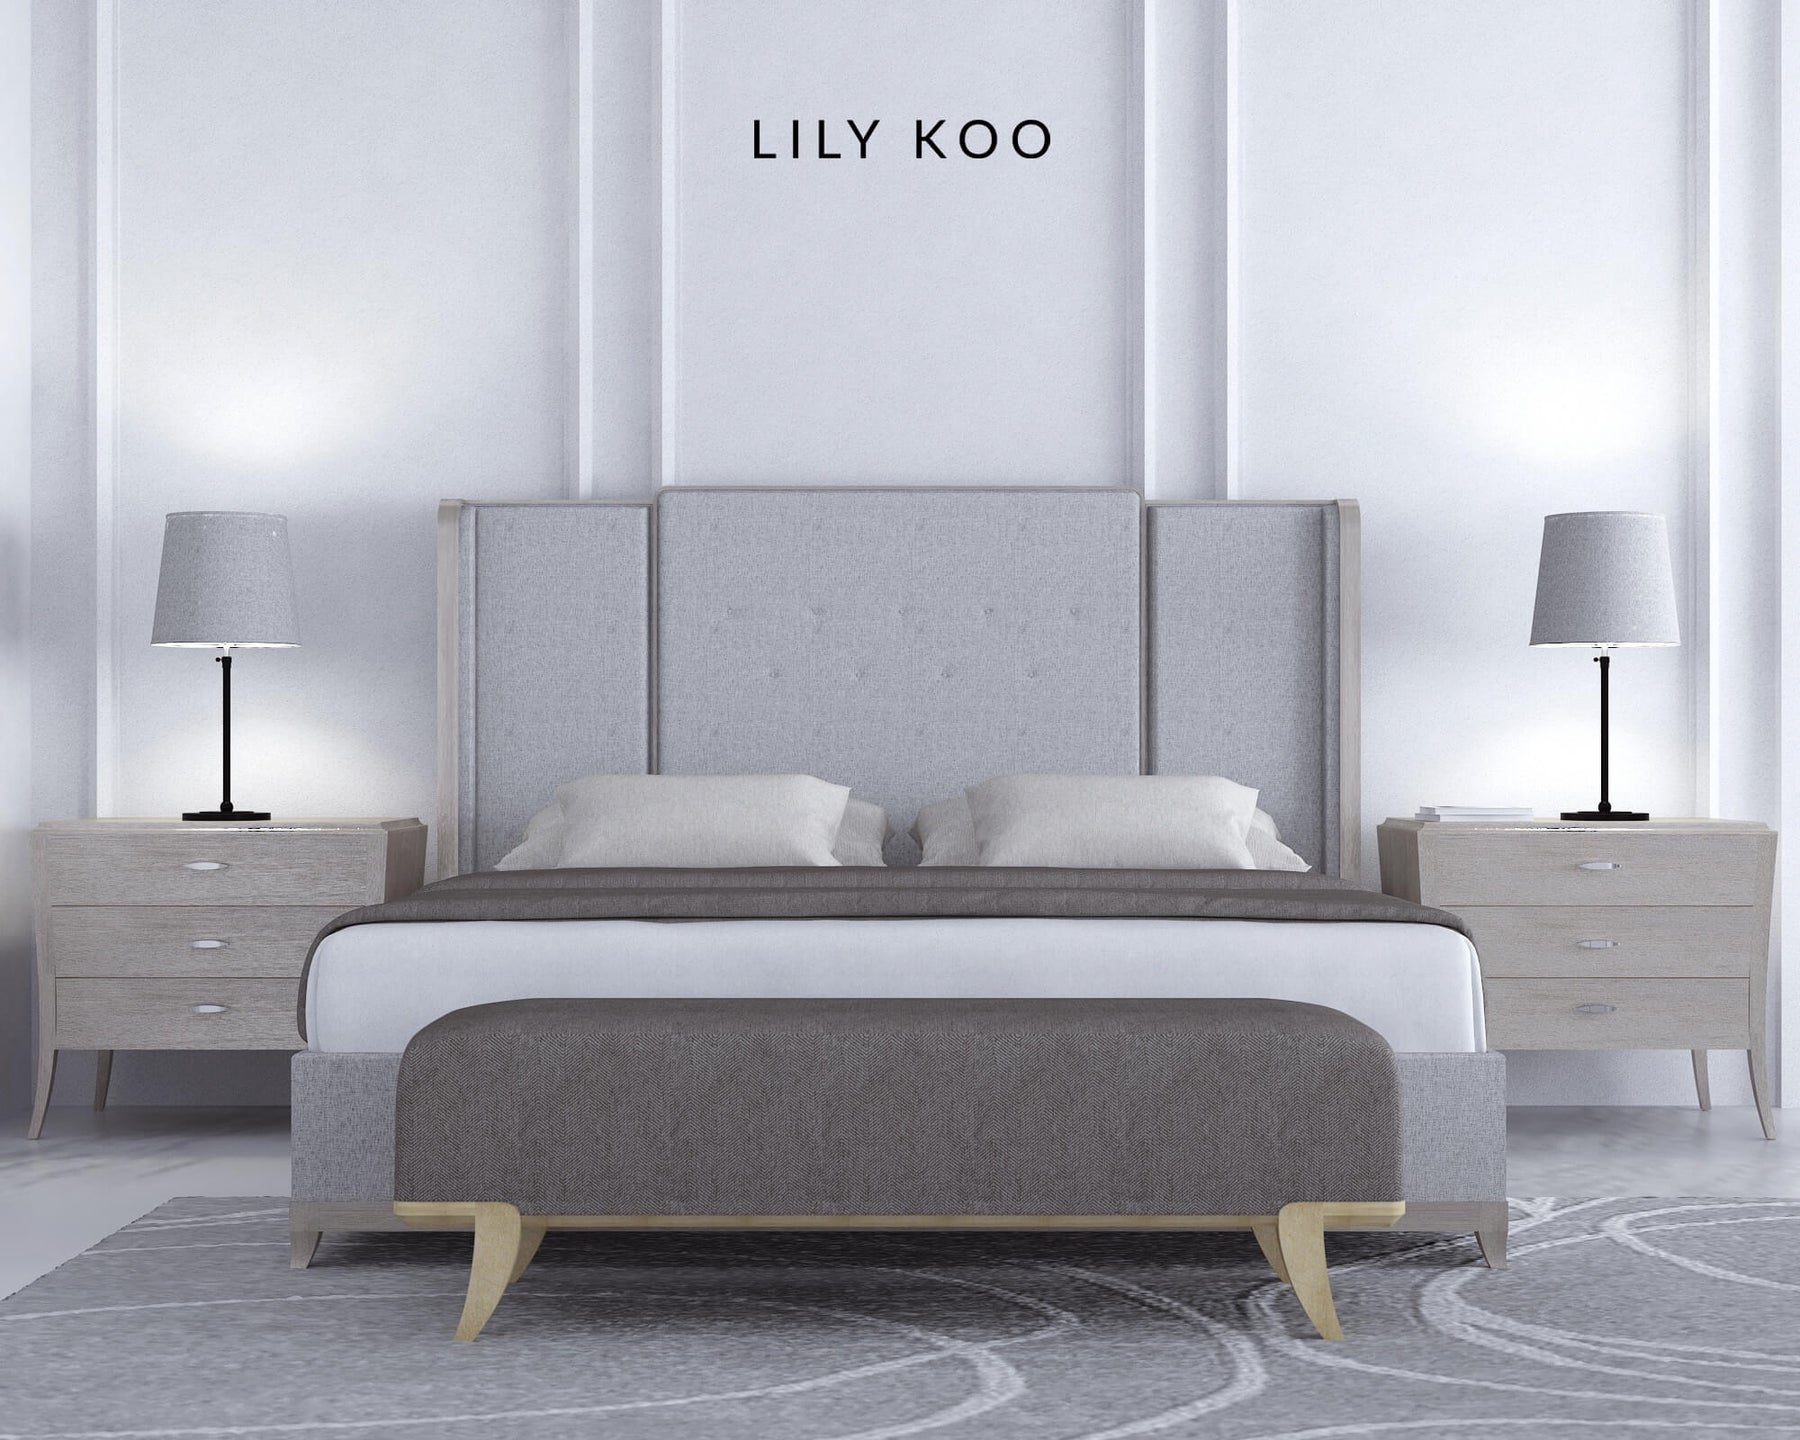 Lily Koo: A Brand Known for its Innovative Interior Furnishings